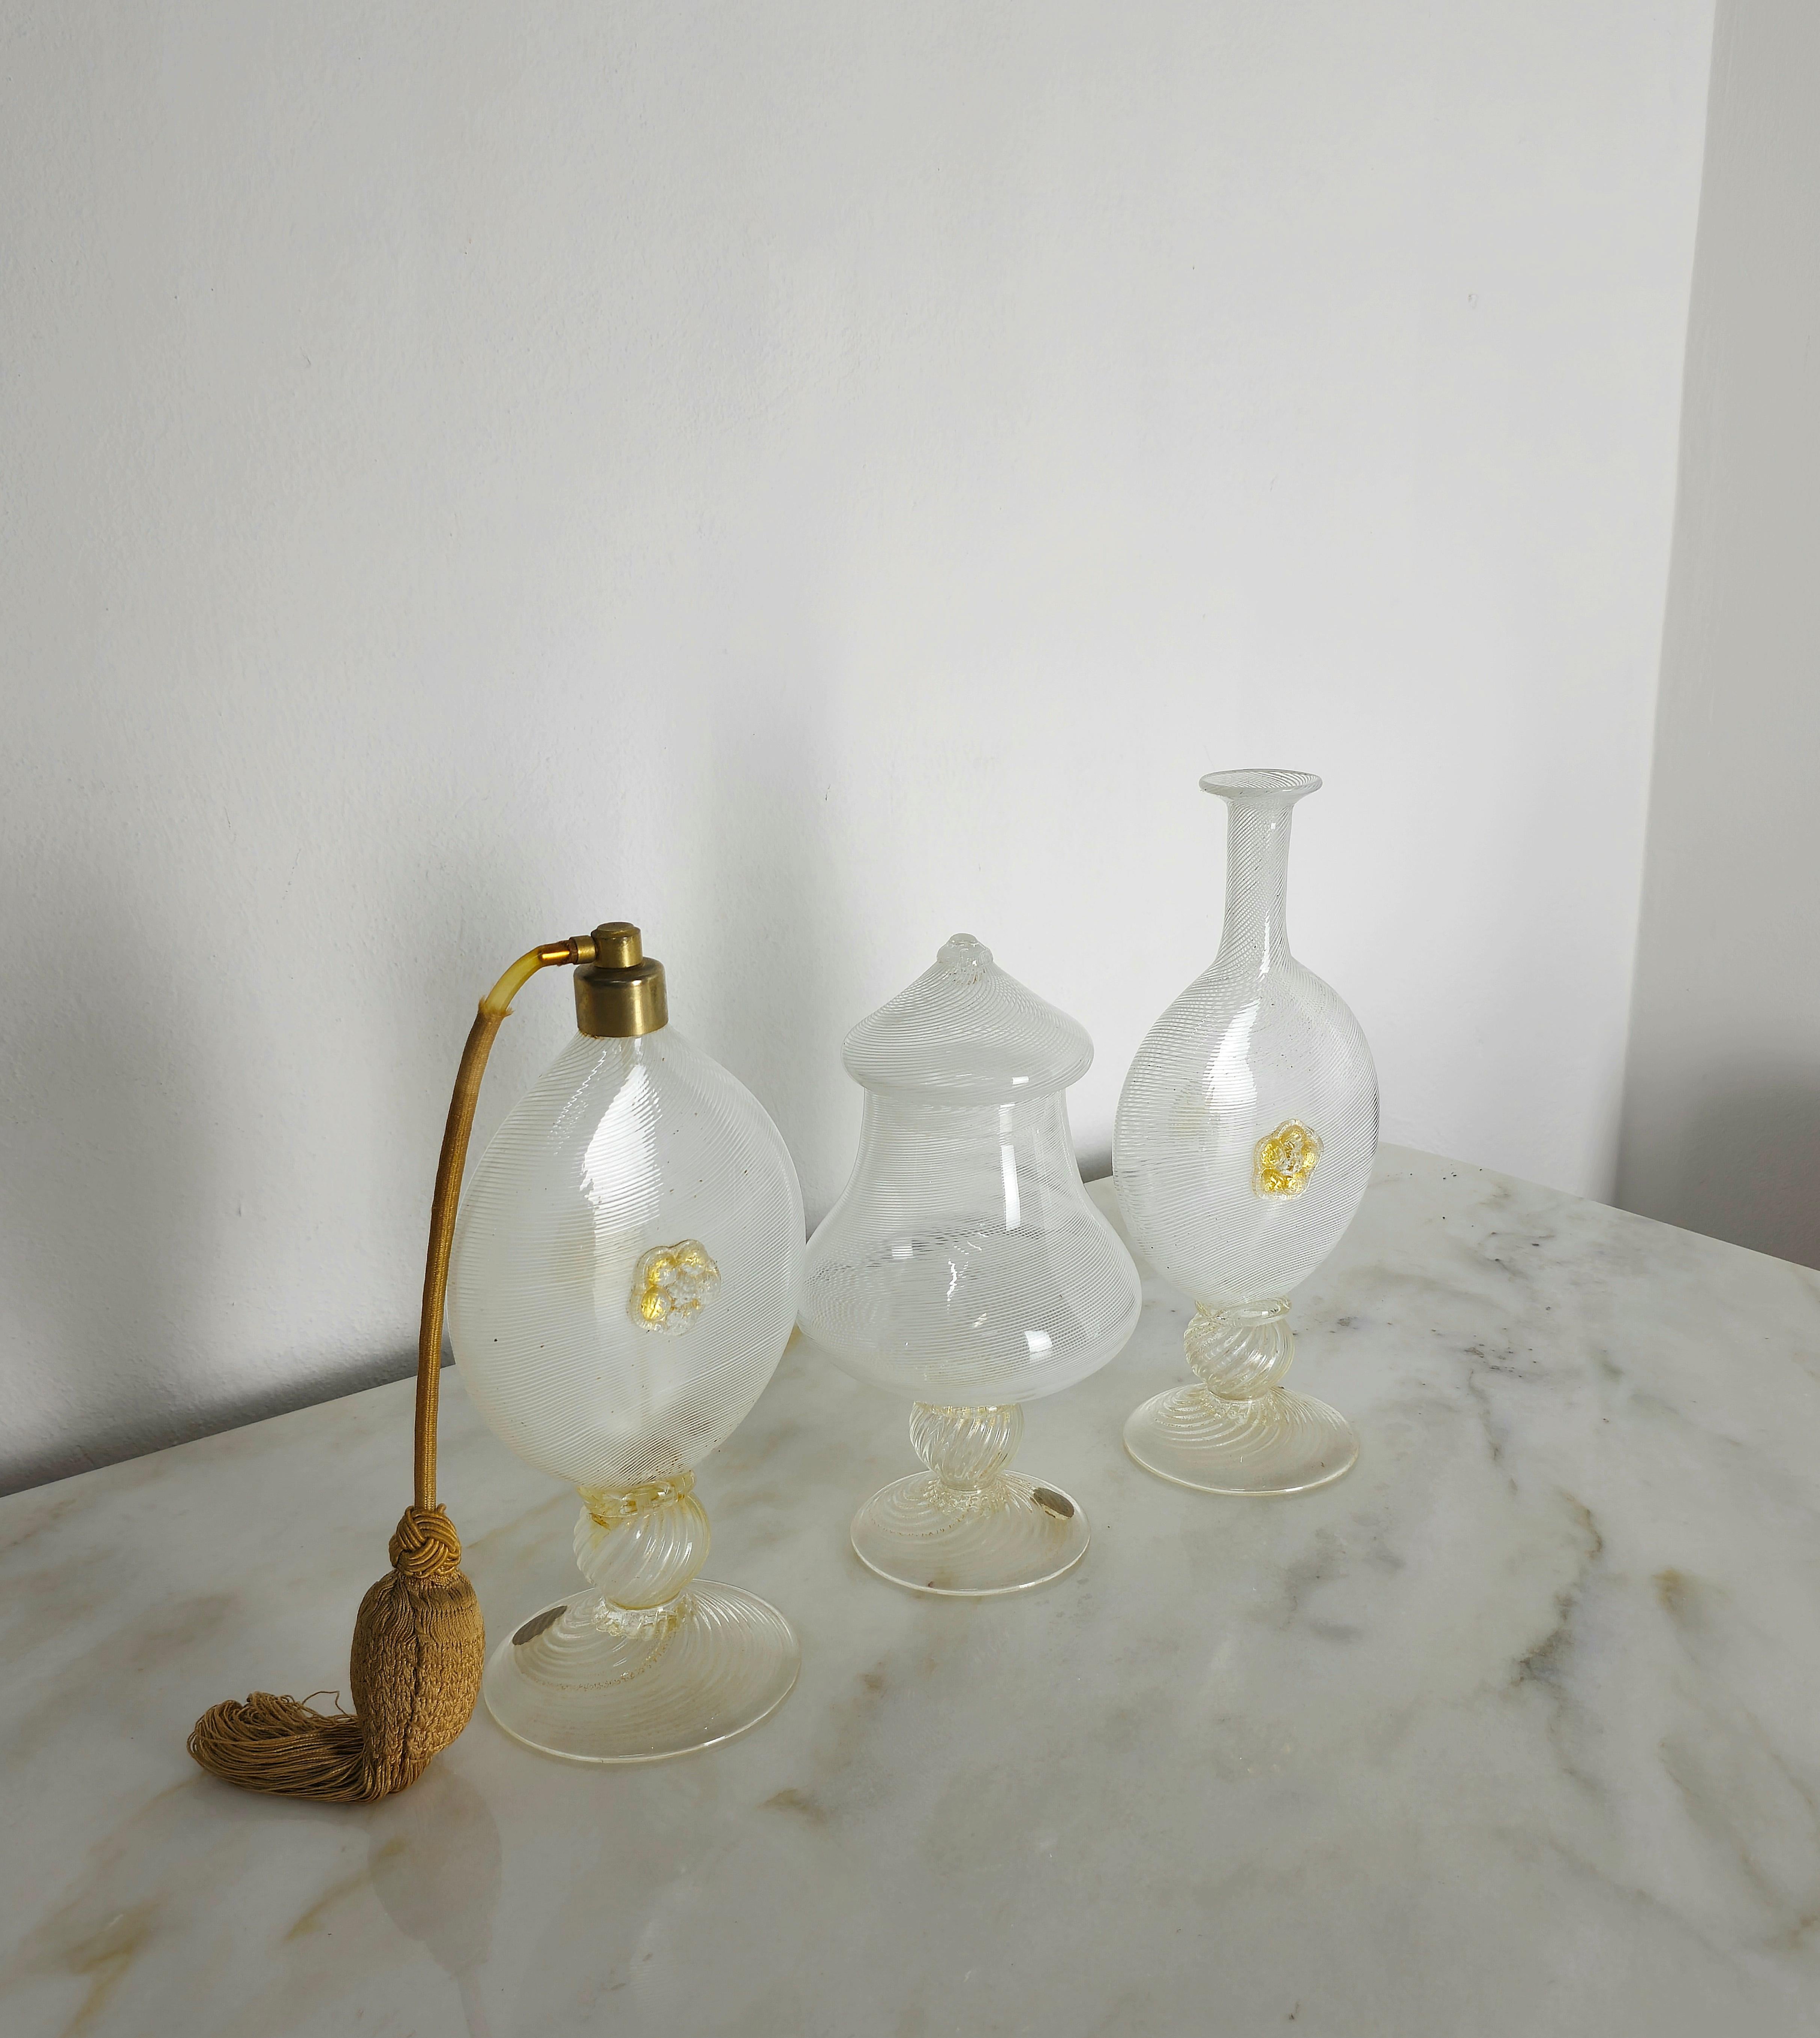 Set of 3 bathroom/toiletry objects made in the 1940s by Barovier&Toso in Murano glass with white filigree in shades of transparent and white with golden decoration.
We would like to point out that this set is sold only as a decorative or display